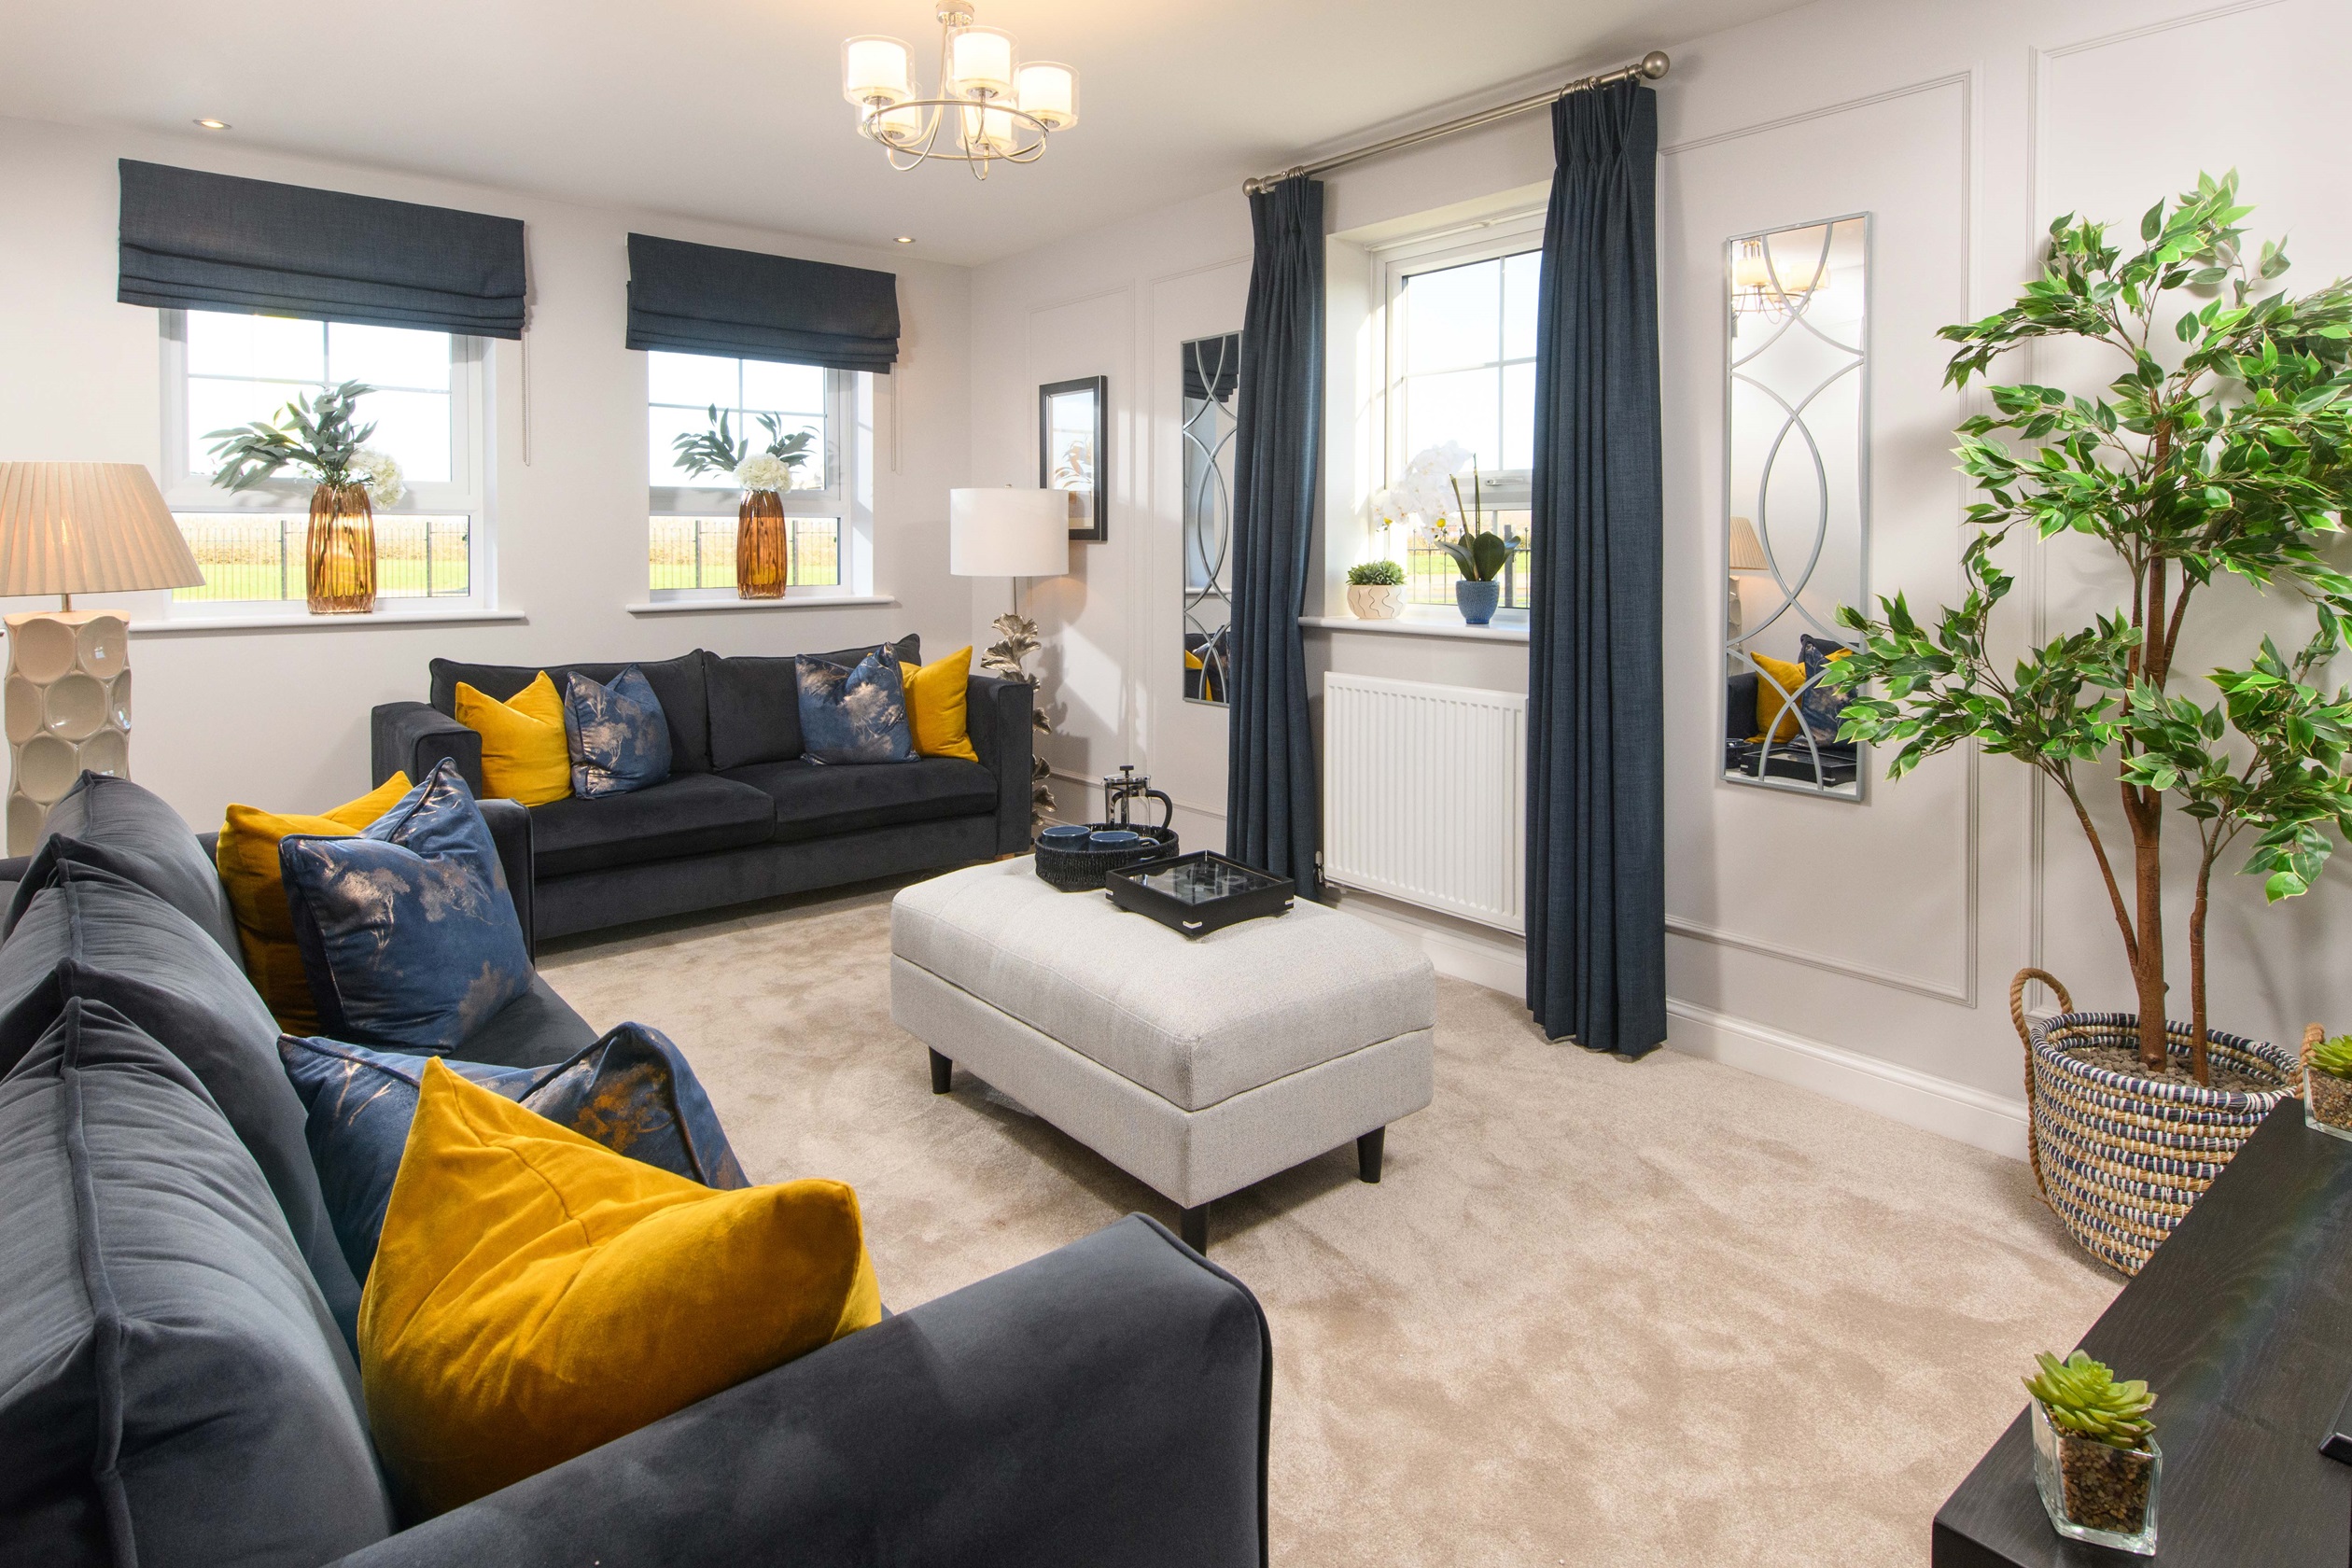 Property 2 of 10. Hesketh Show Home